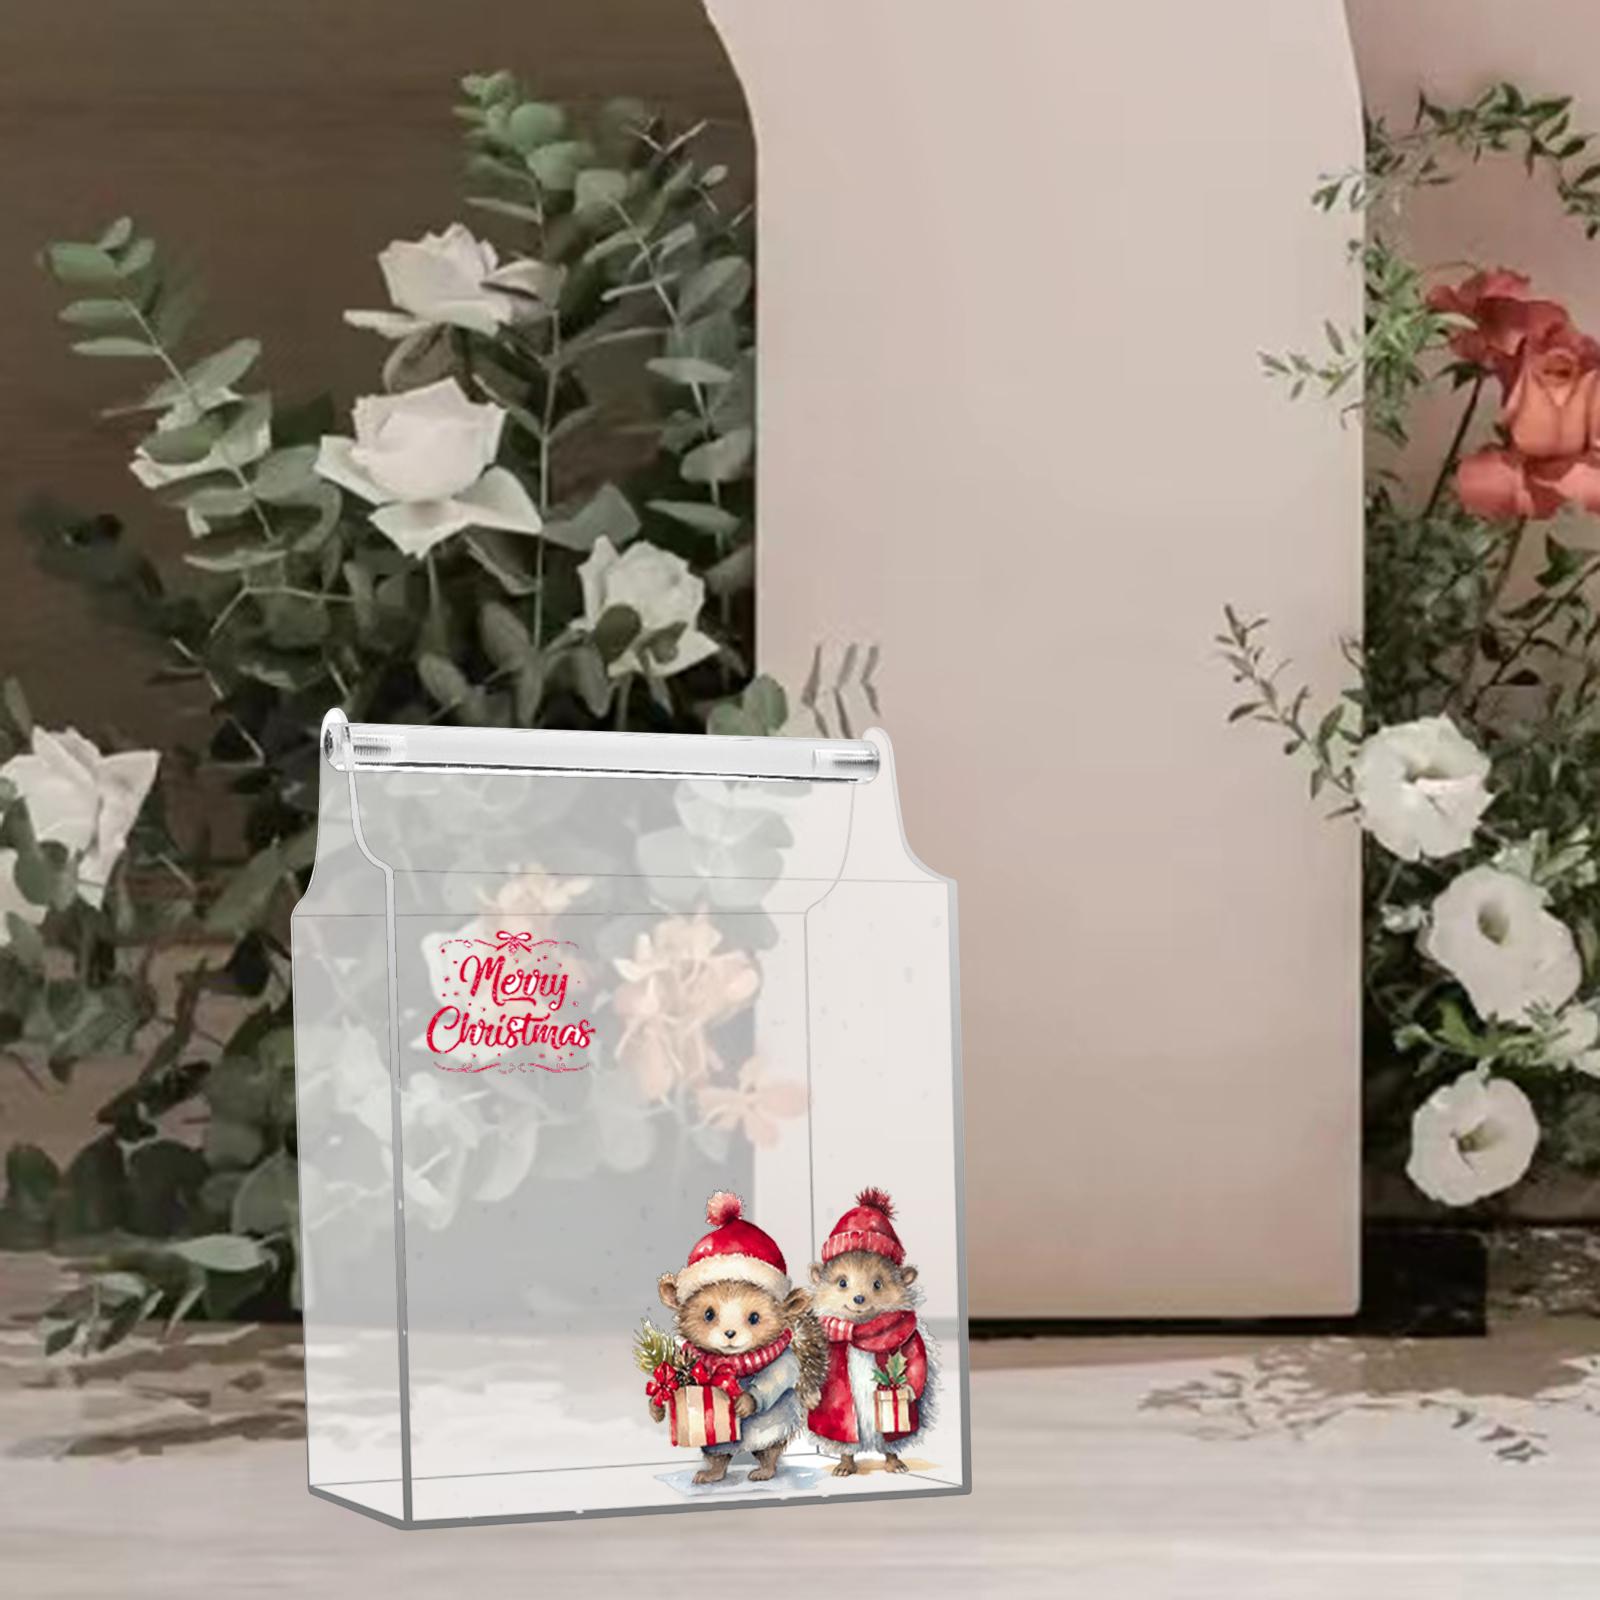 Clear Box Storing Tiny Items Gift Box for Small Collections Chocolates Dolls